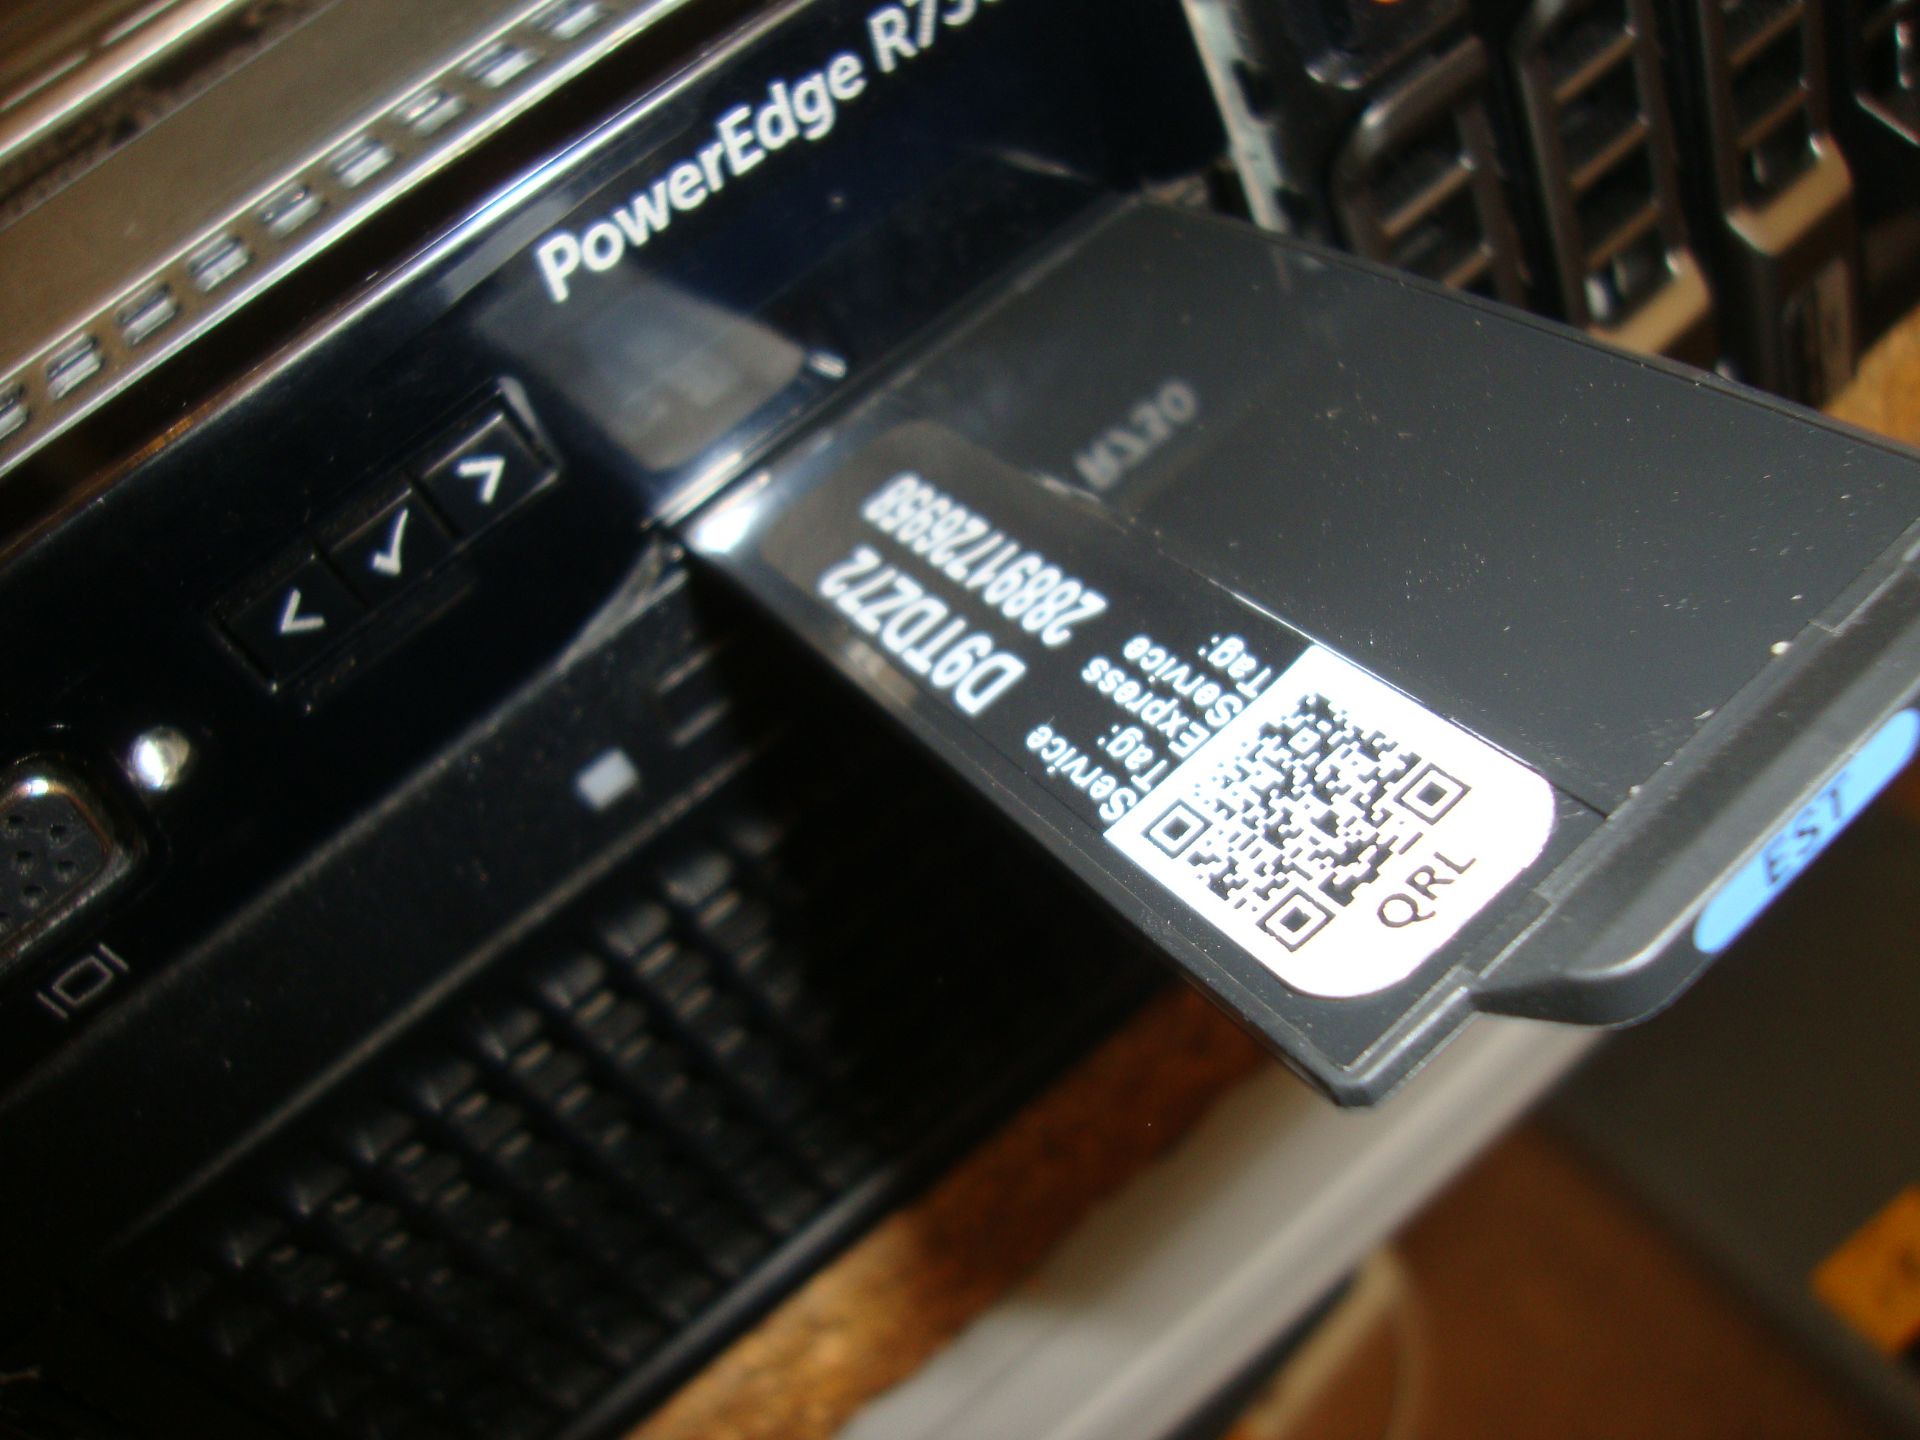 Dell PowerEdge model R730 server with twin Xeon 6 Core E5-2609 V3 1.9 GHz processors, 96Gb RAM, - Image 3 of 15